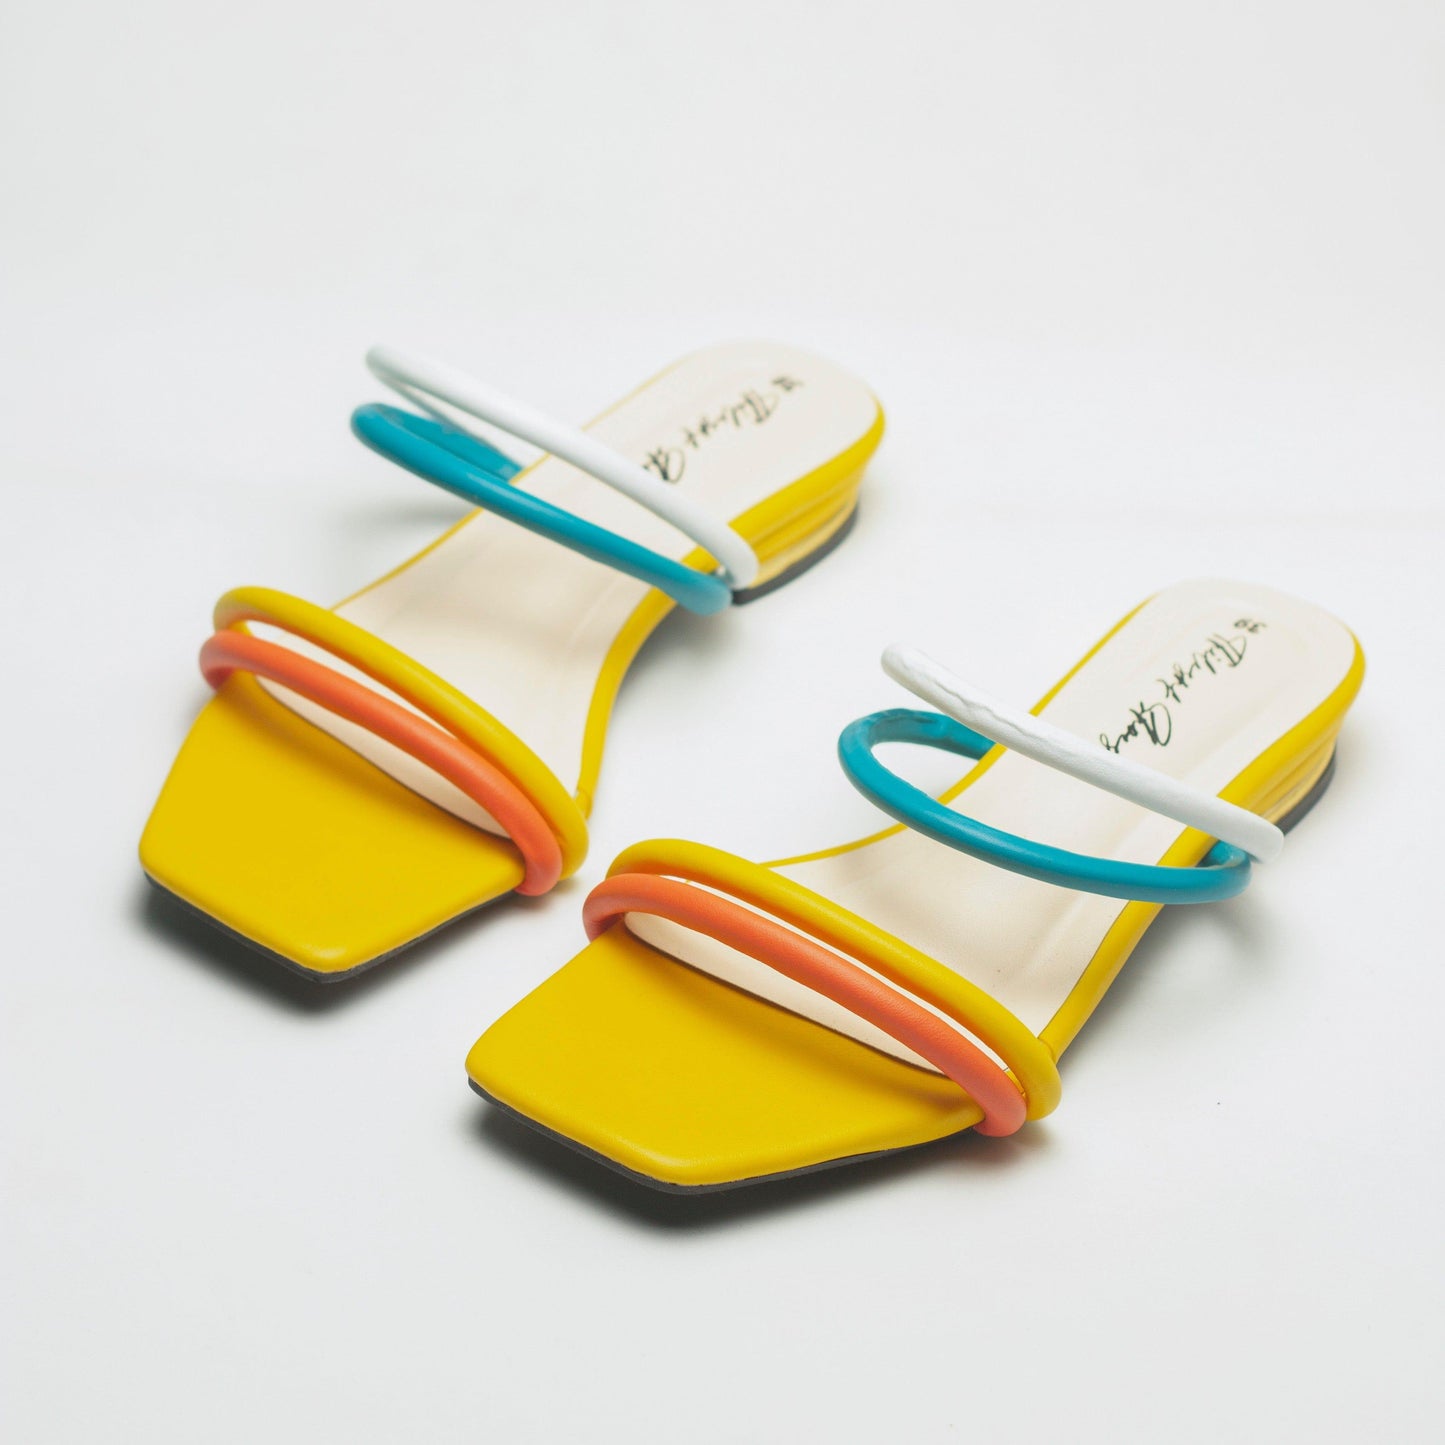 Nawabi Shoes BD Shoes 35 / yellow Flat Sandals for Women: A Wide Range of Styles and Colors Available